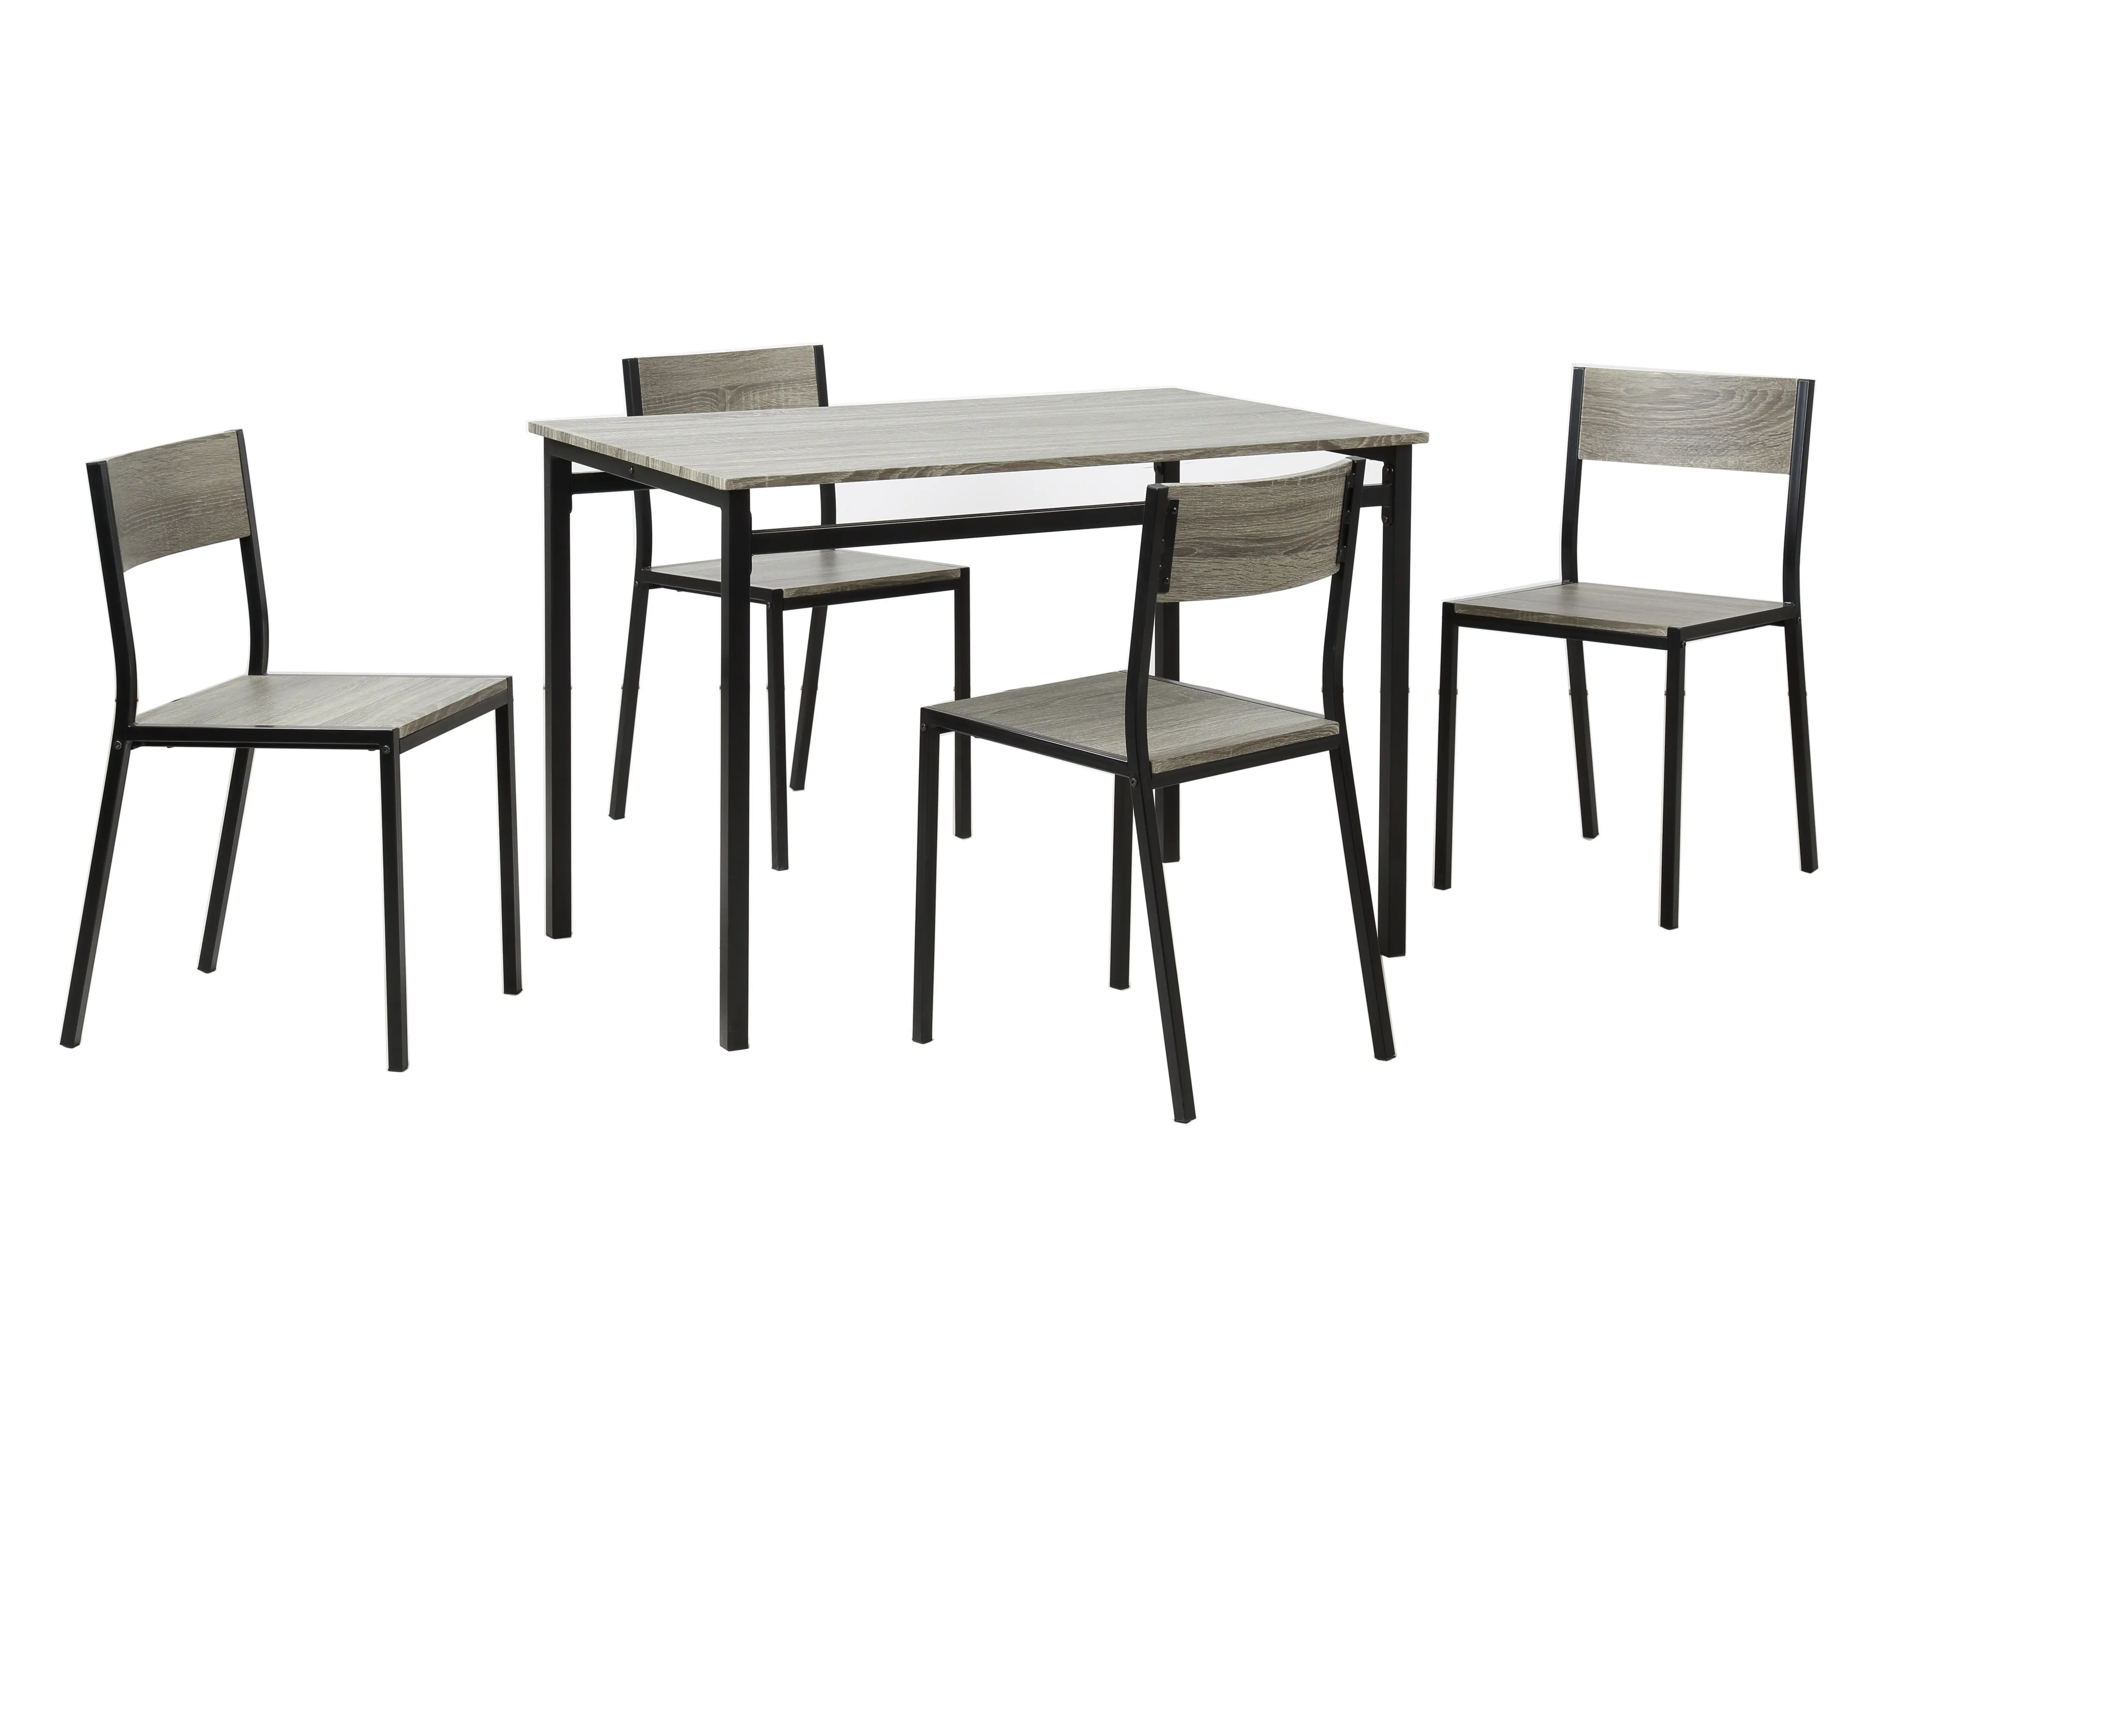 JUSTHOME metal legs square wooden top dining table and 4 chairs sets for home restaurant